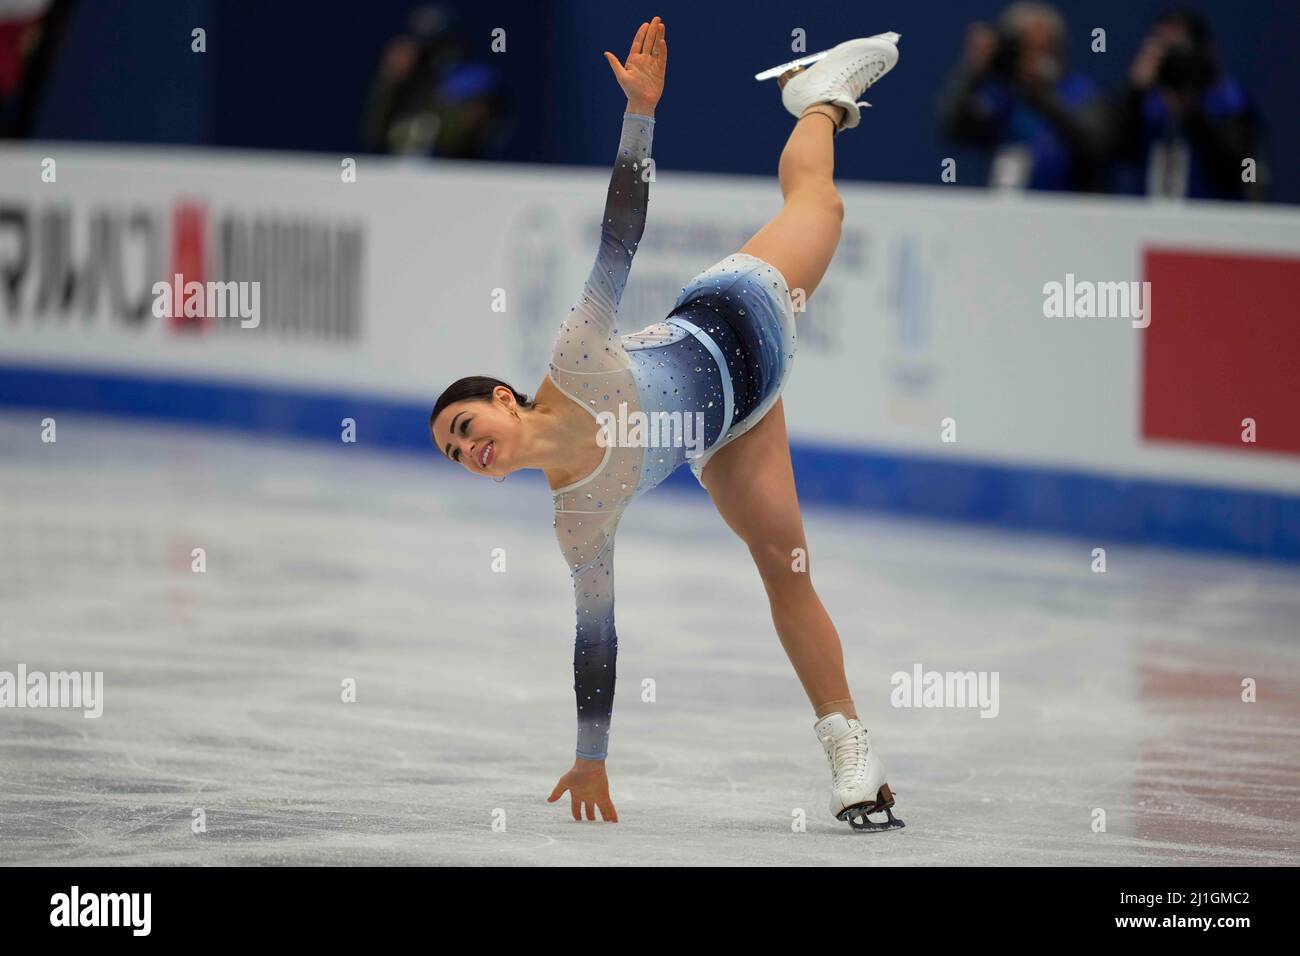 Sud de France Arena, Montpellier, France. 25th Mar, 2022. Julia Sauter from Romania during Womens final, World Figure Skating Championship at Sud de France Arena, Montpellier, France. Kim Price/CSM/Alamy Live News Stock Photo